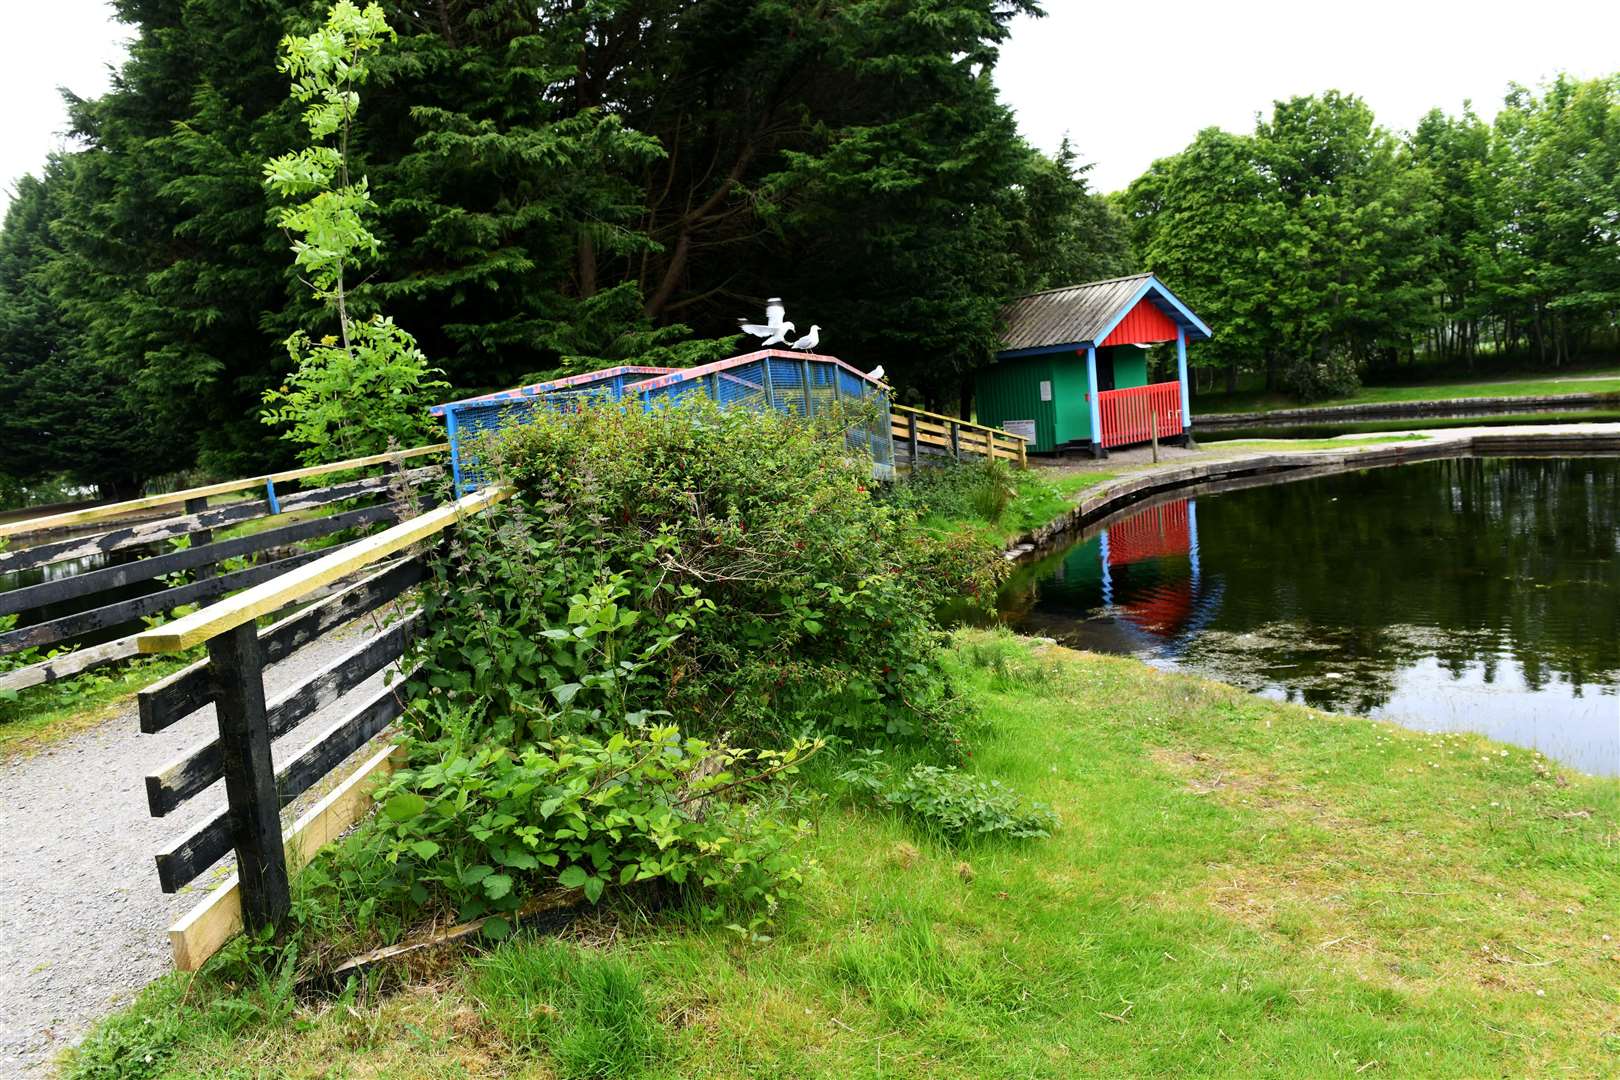 The boating pond has long been a popular attraction at Whin Park.